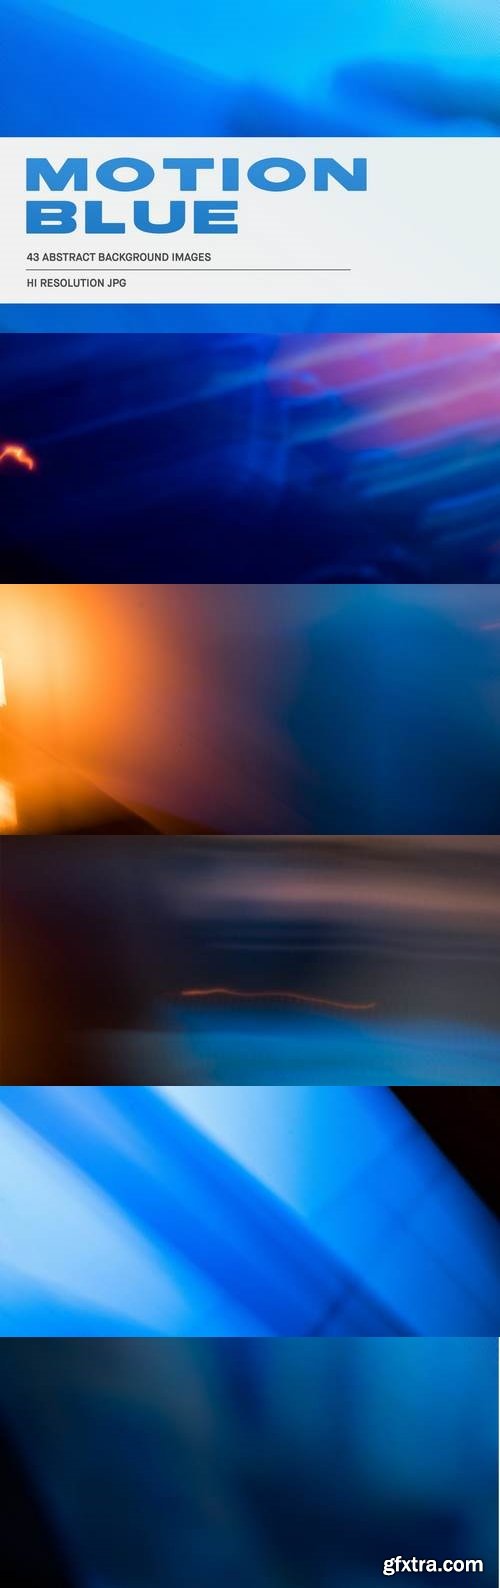 Thehungryjpeg - Motion Blue - 43 Abstract Background Images 75653